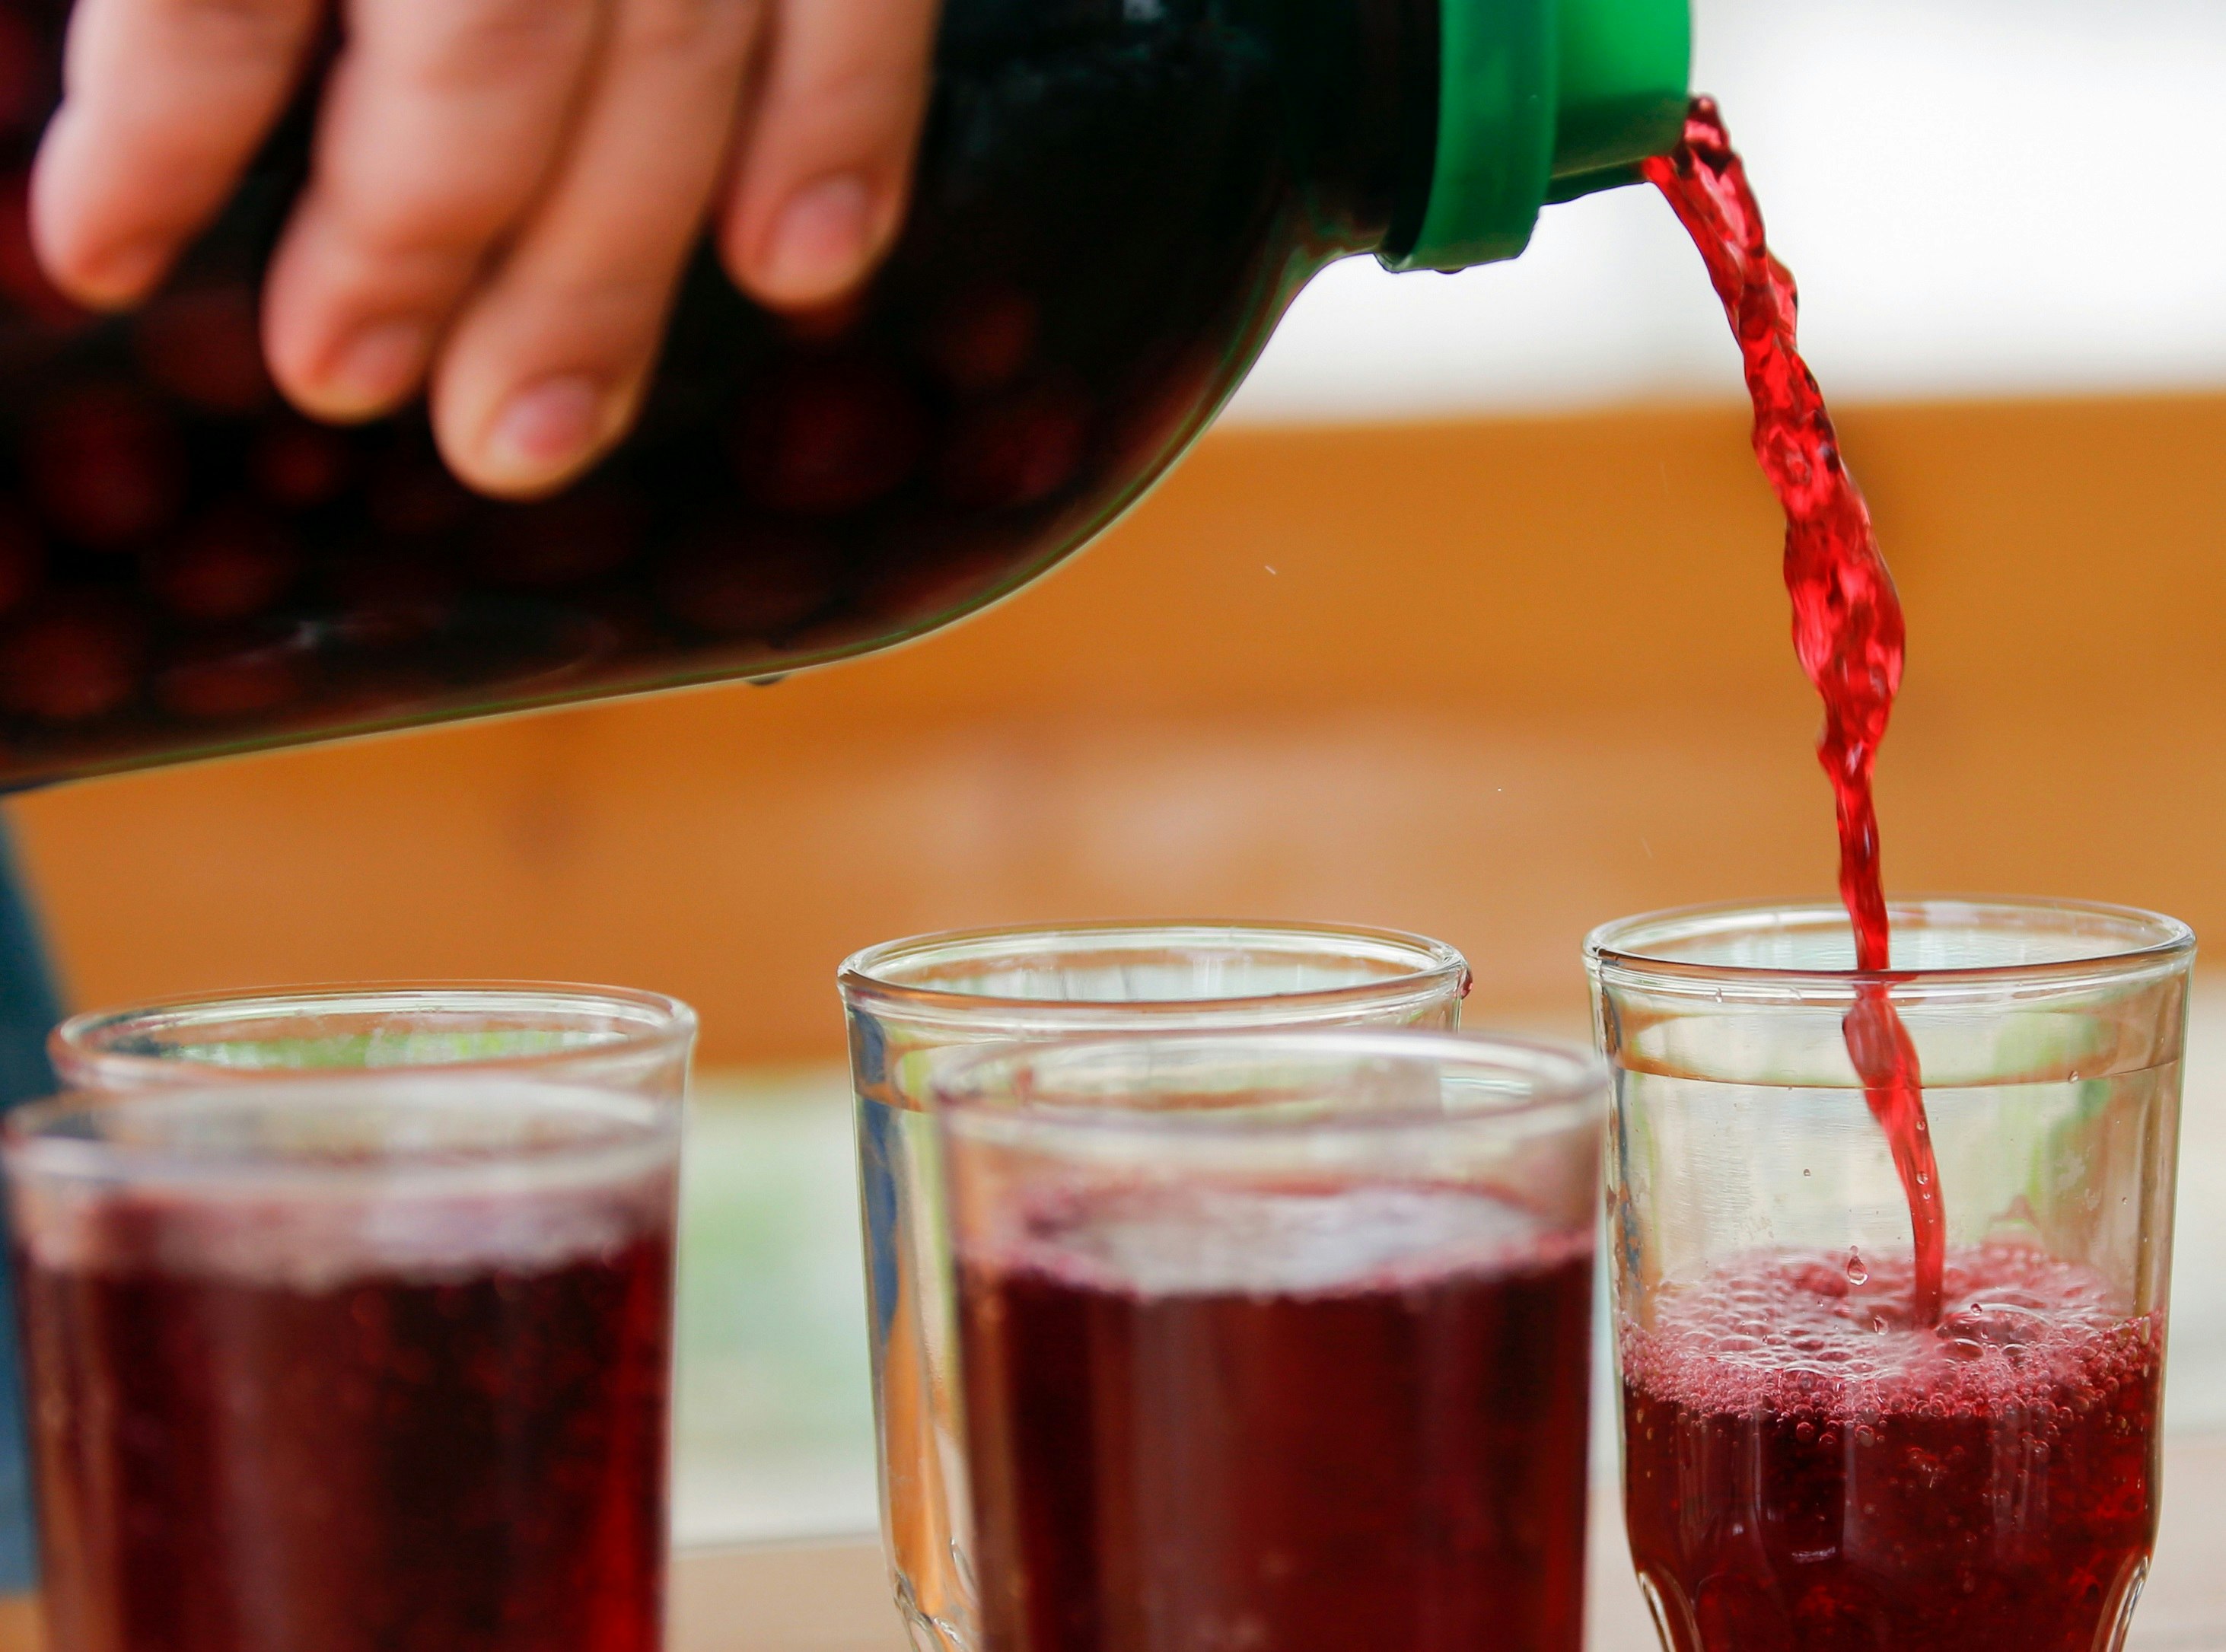 Dark red juice is poured from a bottle into five glasses.